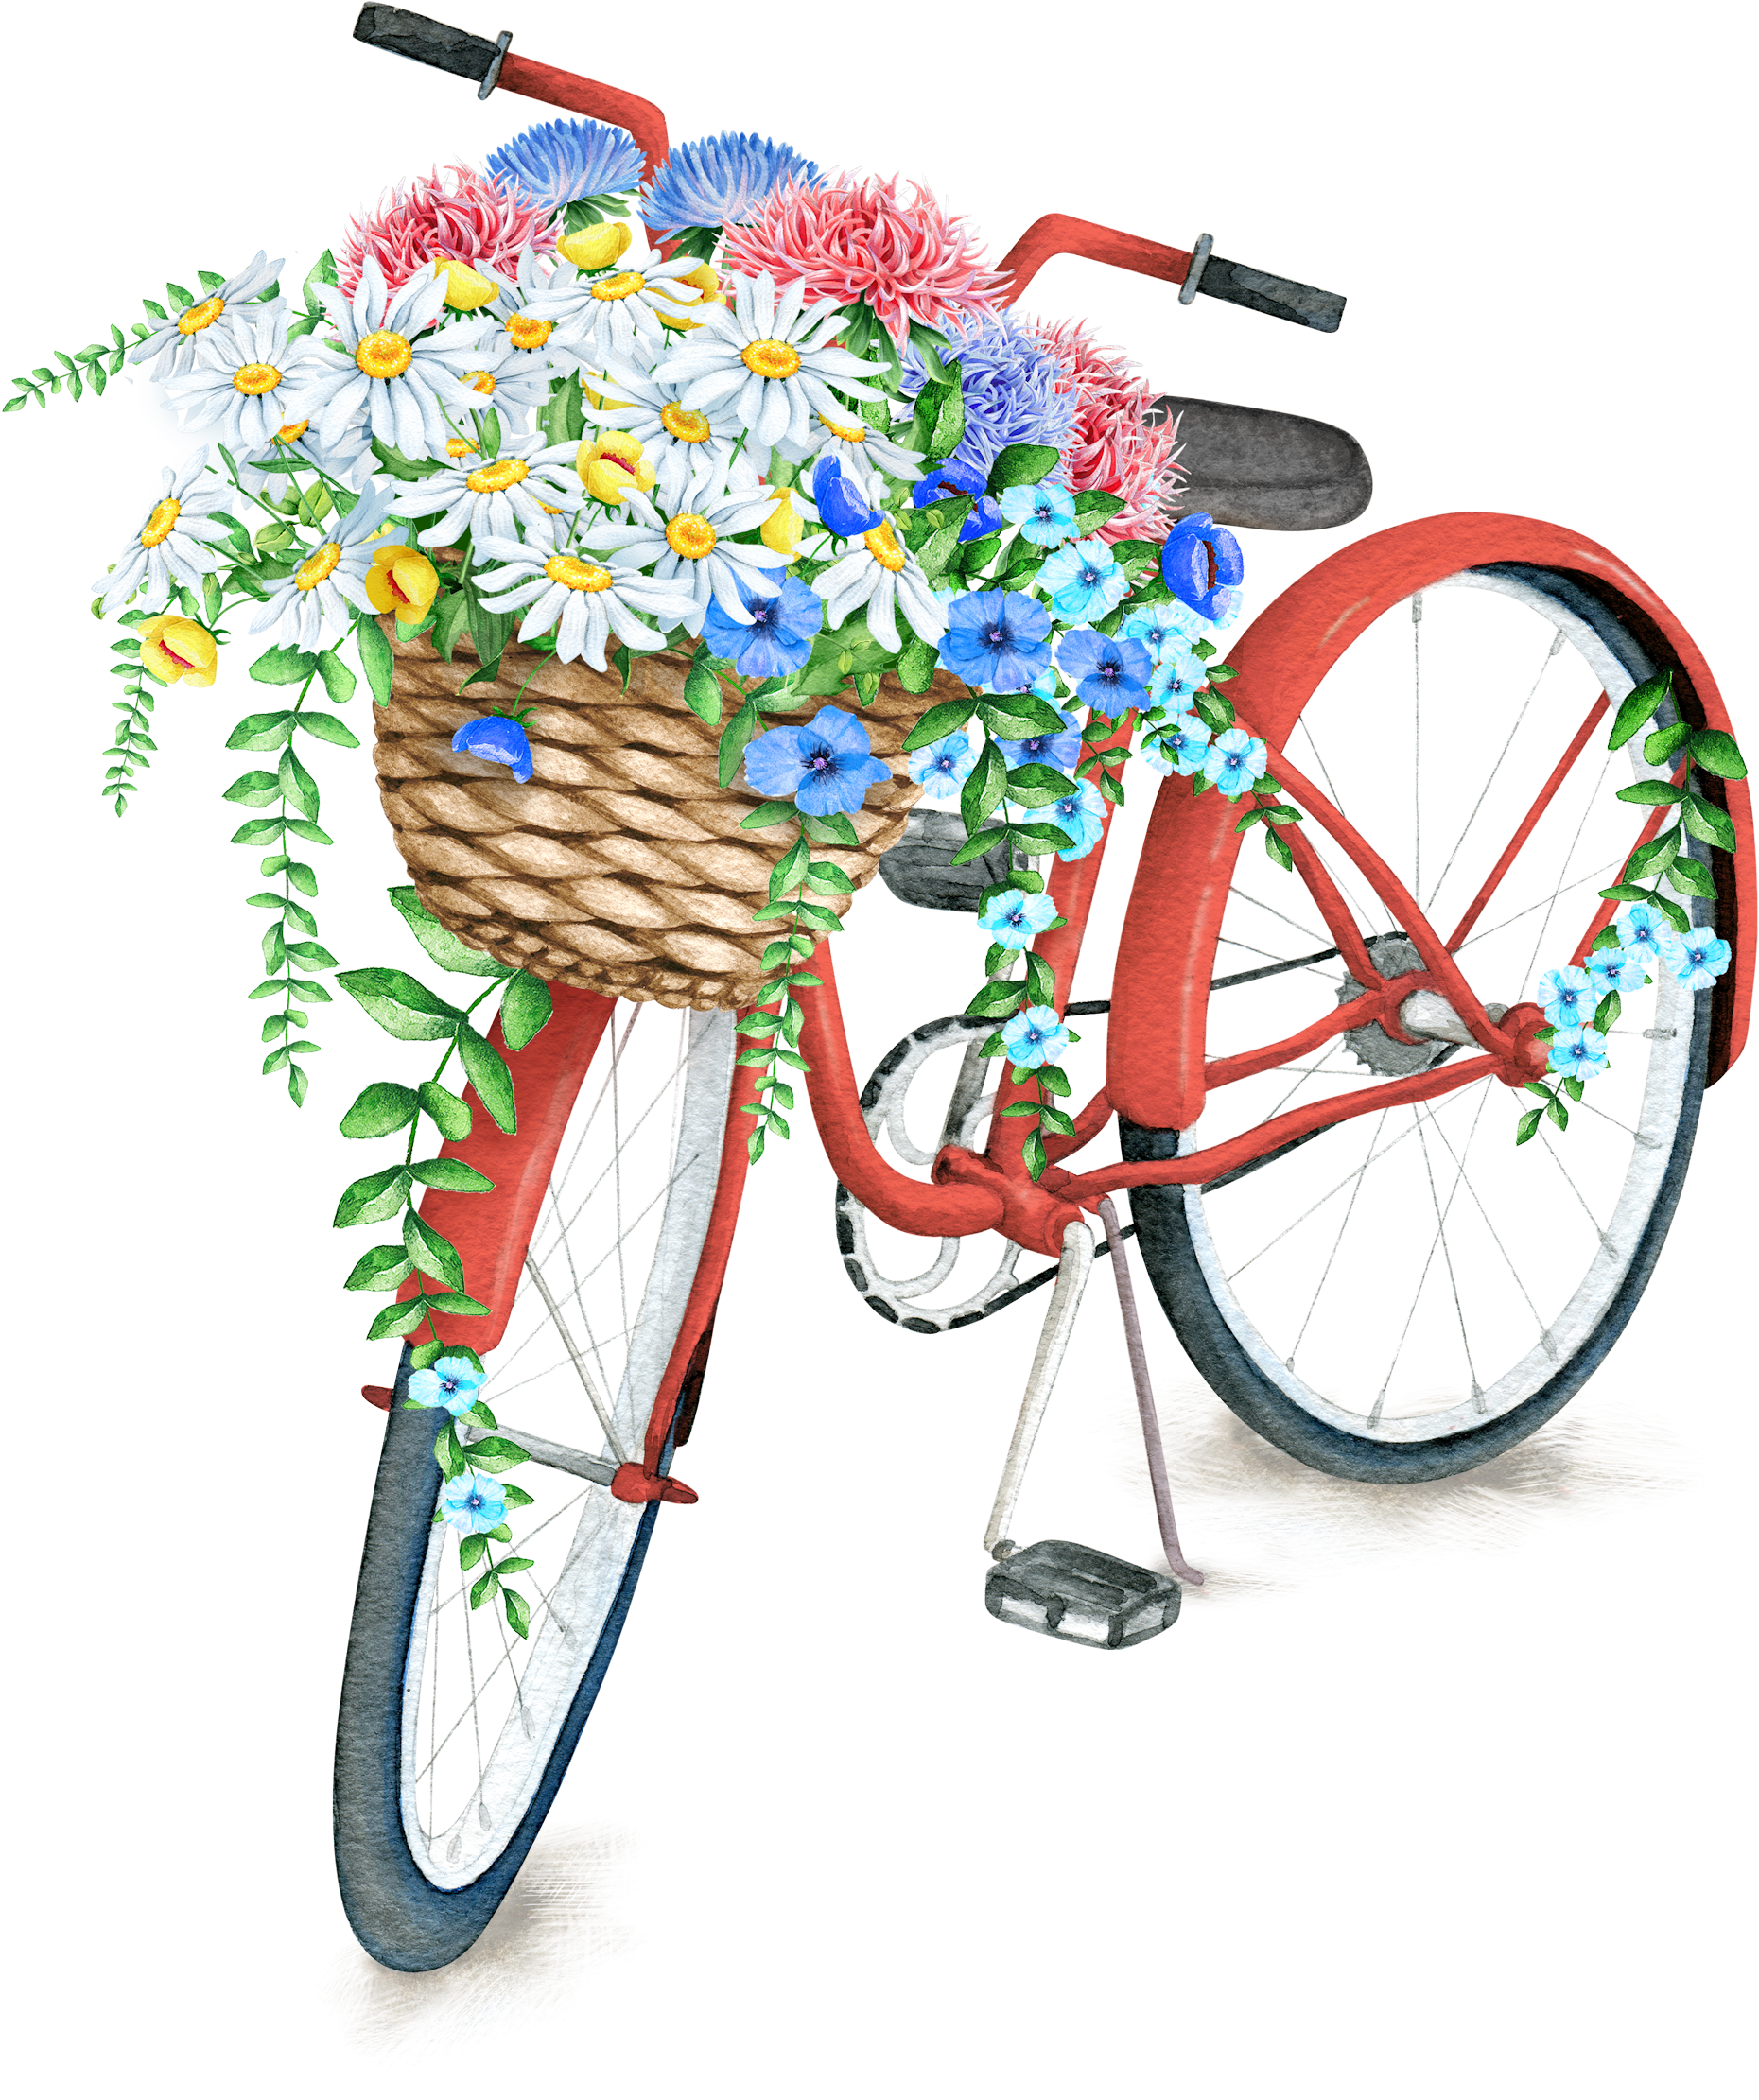 Bicycle Race, Vintage Bicycles, Bike Art, Fashion Illustrations, - Bicycle With Flowers In Basket Paintings (2000x2278)